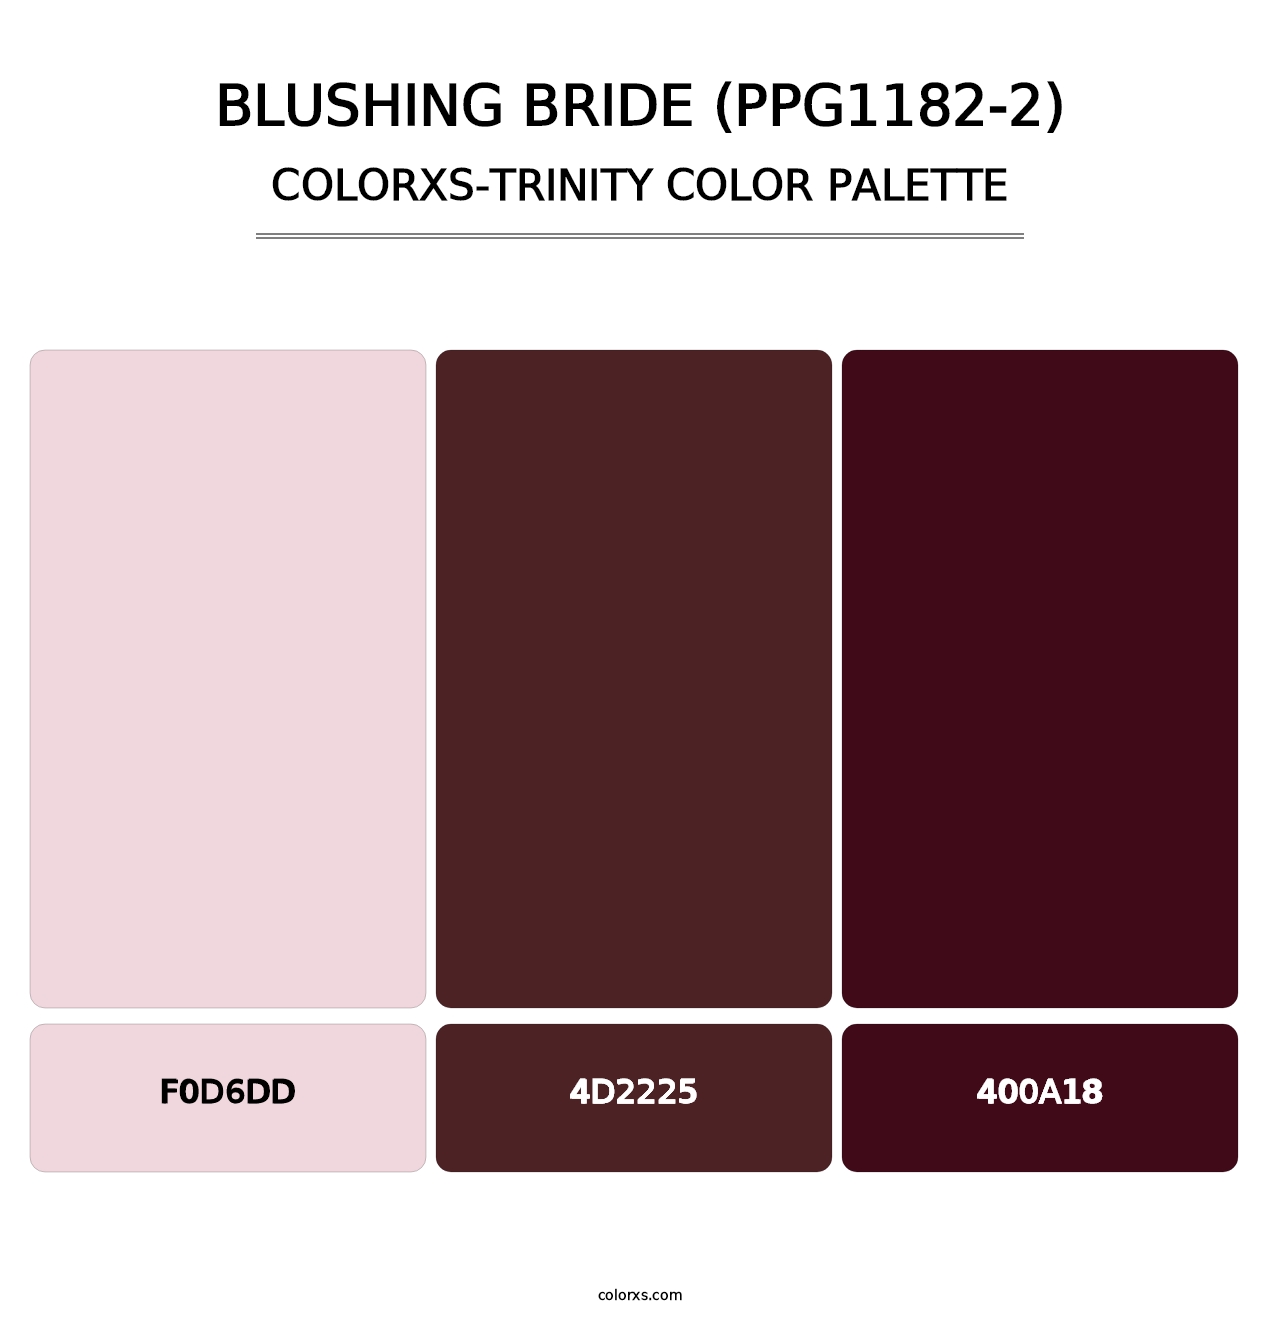 Blushing Bride (PPG1182-2) - Colorxs Trinity Palette